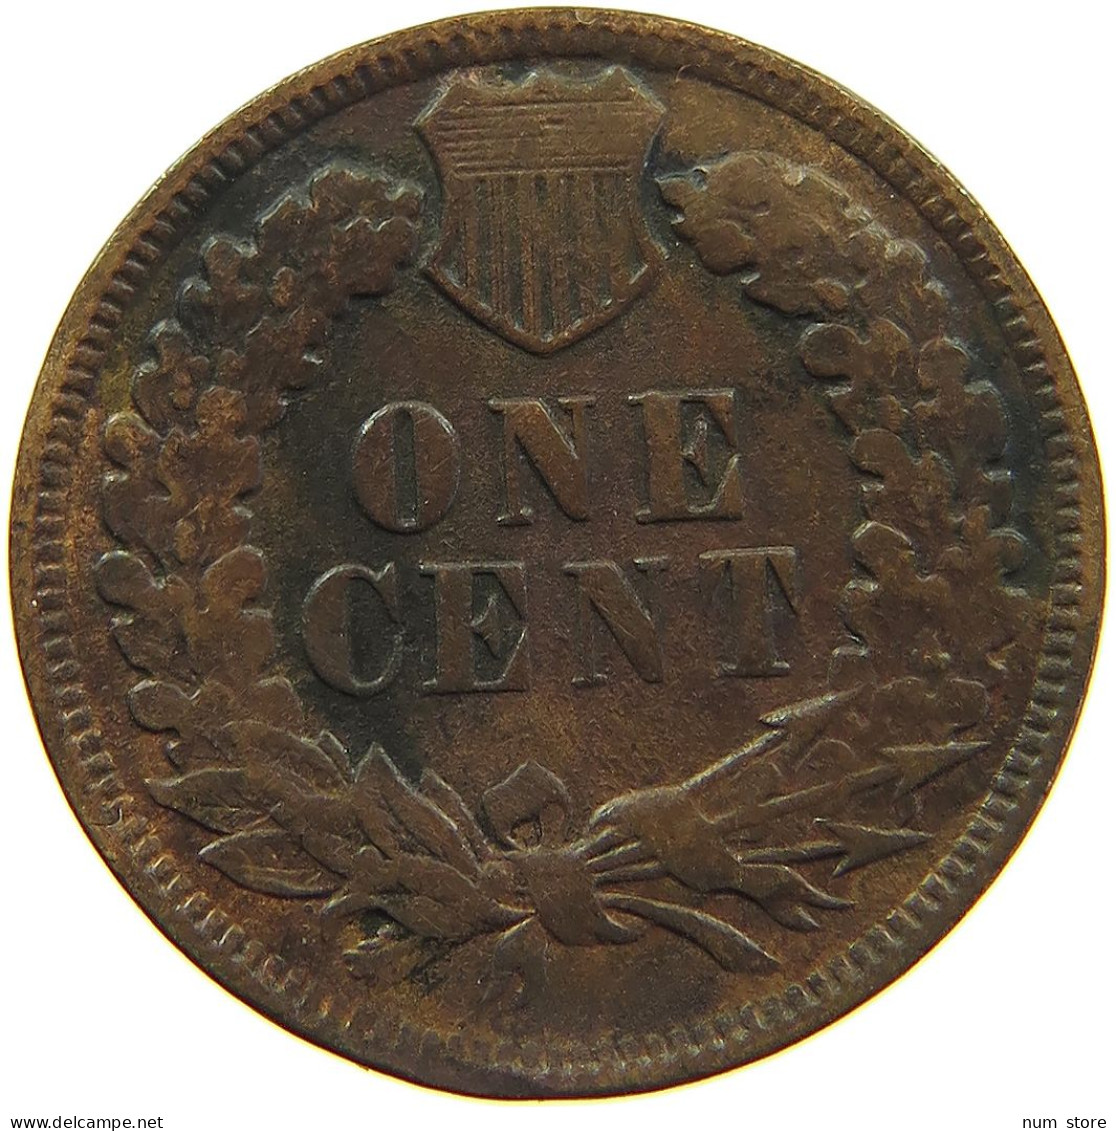 UNITED STATES OF AMERICA CENT 1908 INDIAN HEAD #s091 0367 - 1859-1909: Indian Head